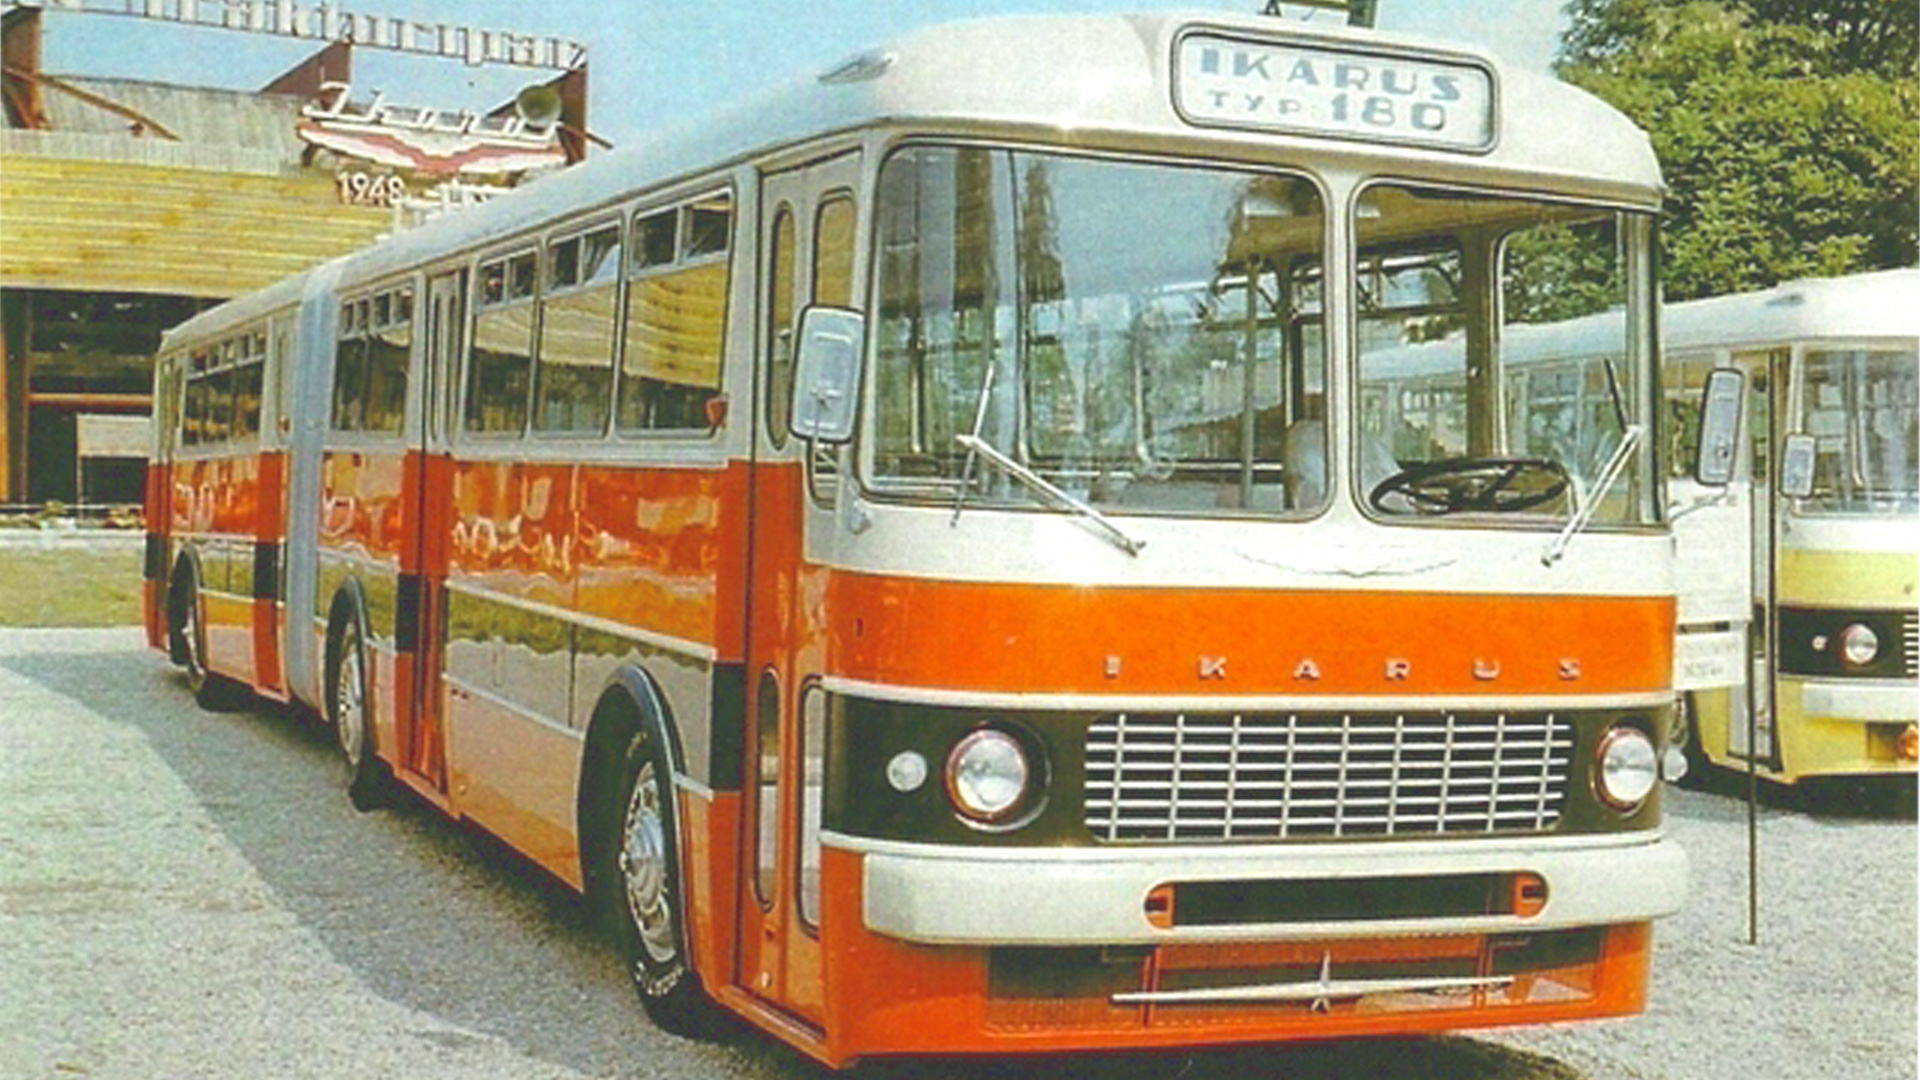 Ikarus 180 Photos and Images & Pictures